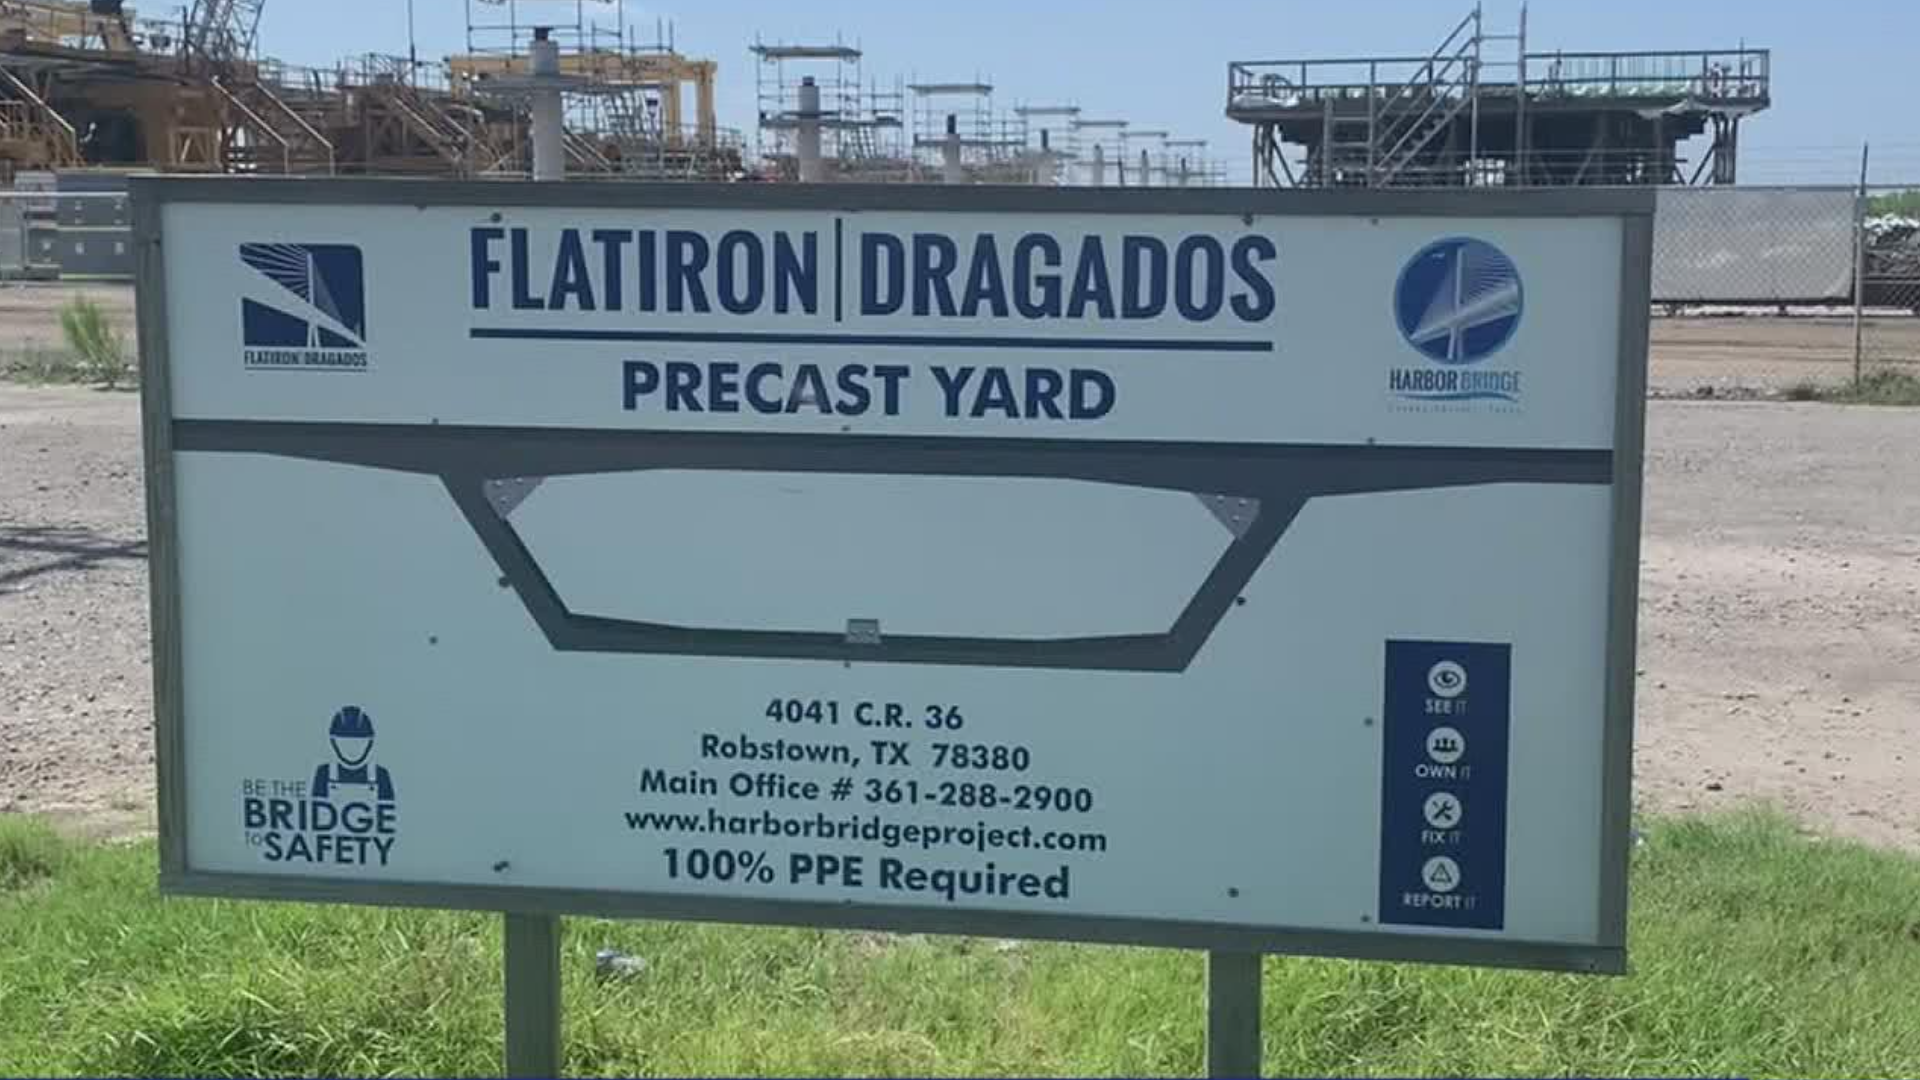 Flatiron Dragados this week gave TxDOT proposed solutions to the bridge issues and meetings are ongoing to review those solutions, TxDOT said.